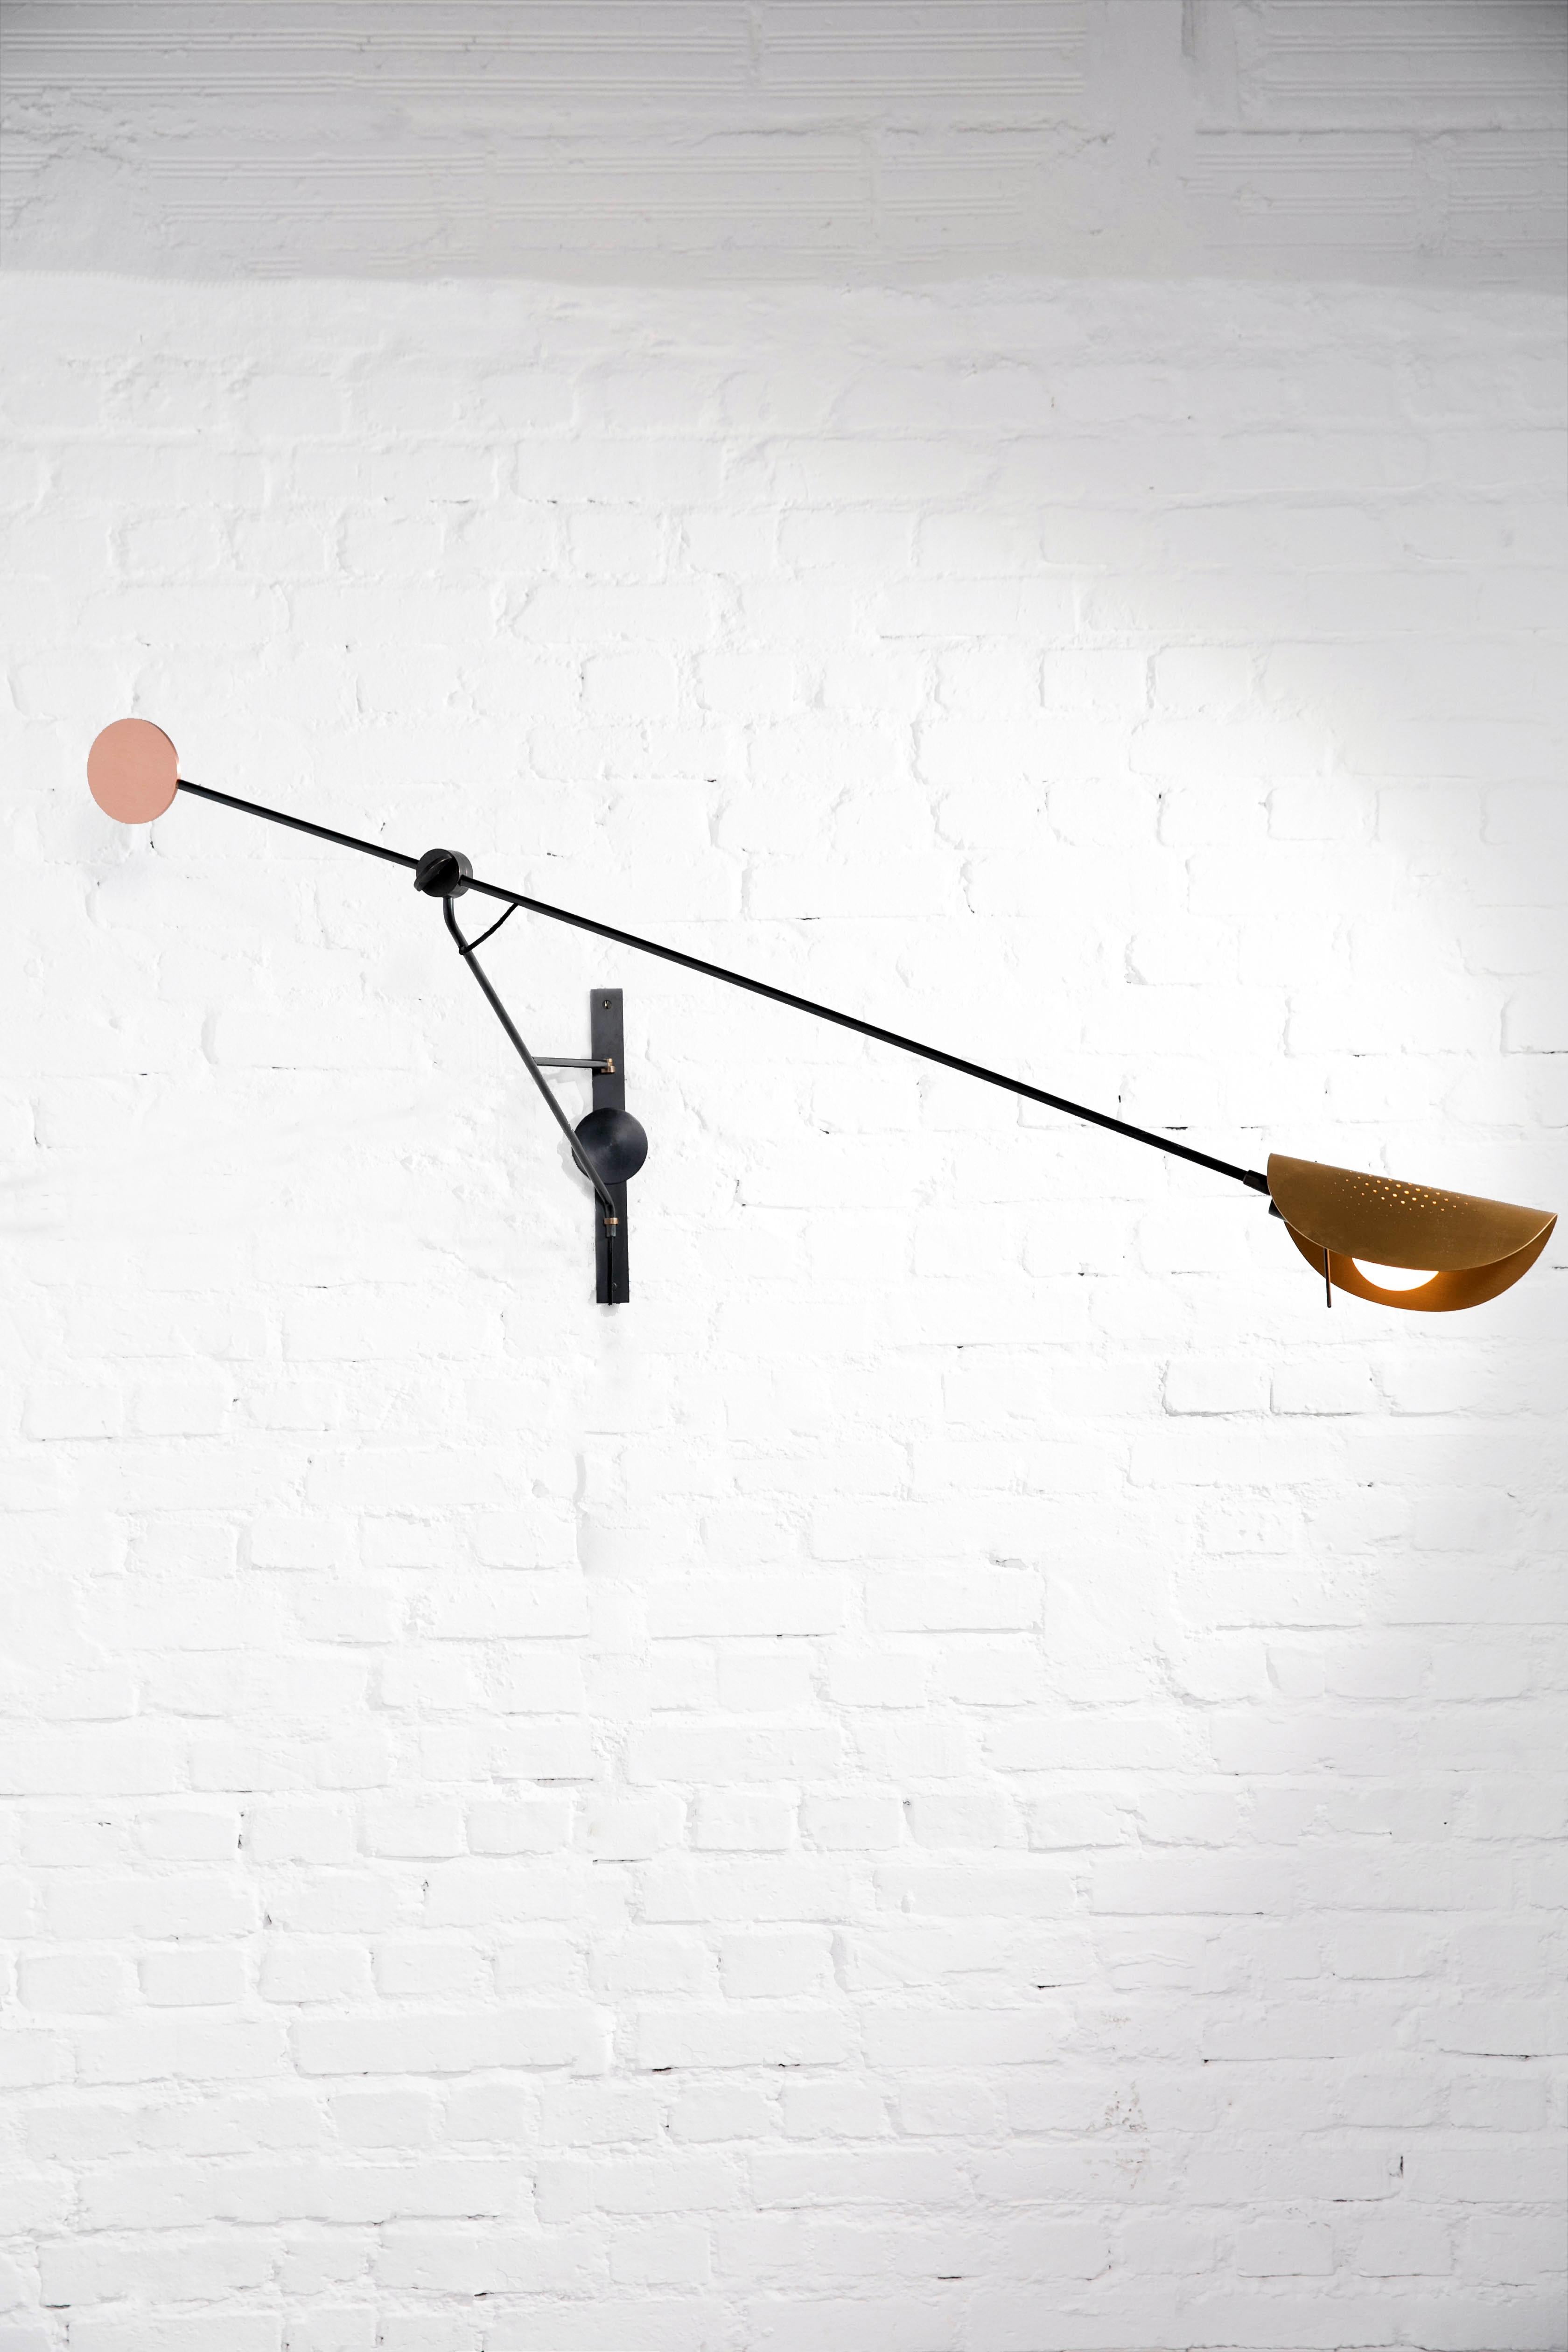 Moon bracket lamp by SB26
Dimensions: W 159 x D 43 x H 19 cm
Materials: Steel, copper, brass gilded with pure gold.

Evoking an Industrial metal architecture by its Silhouette, Moon is balanced in space and refined to its worked ends which gives